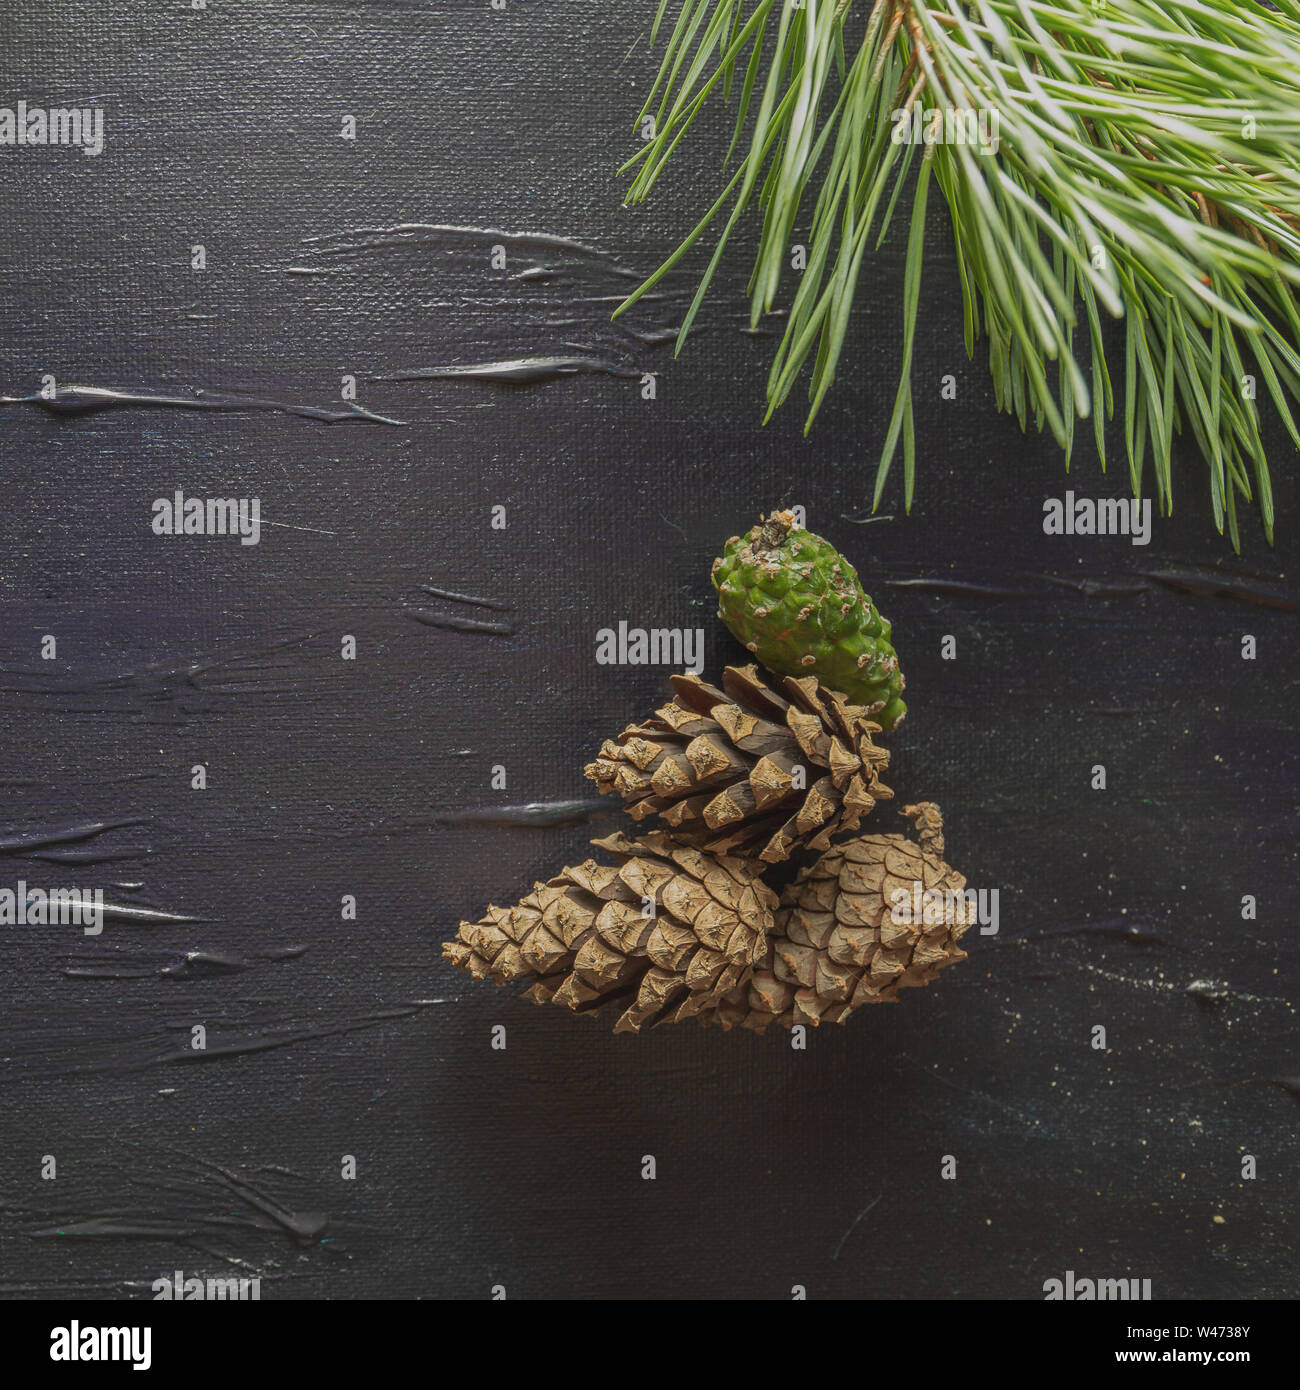 A black background with a pine motif. Cones and needles of a tree ...